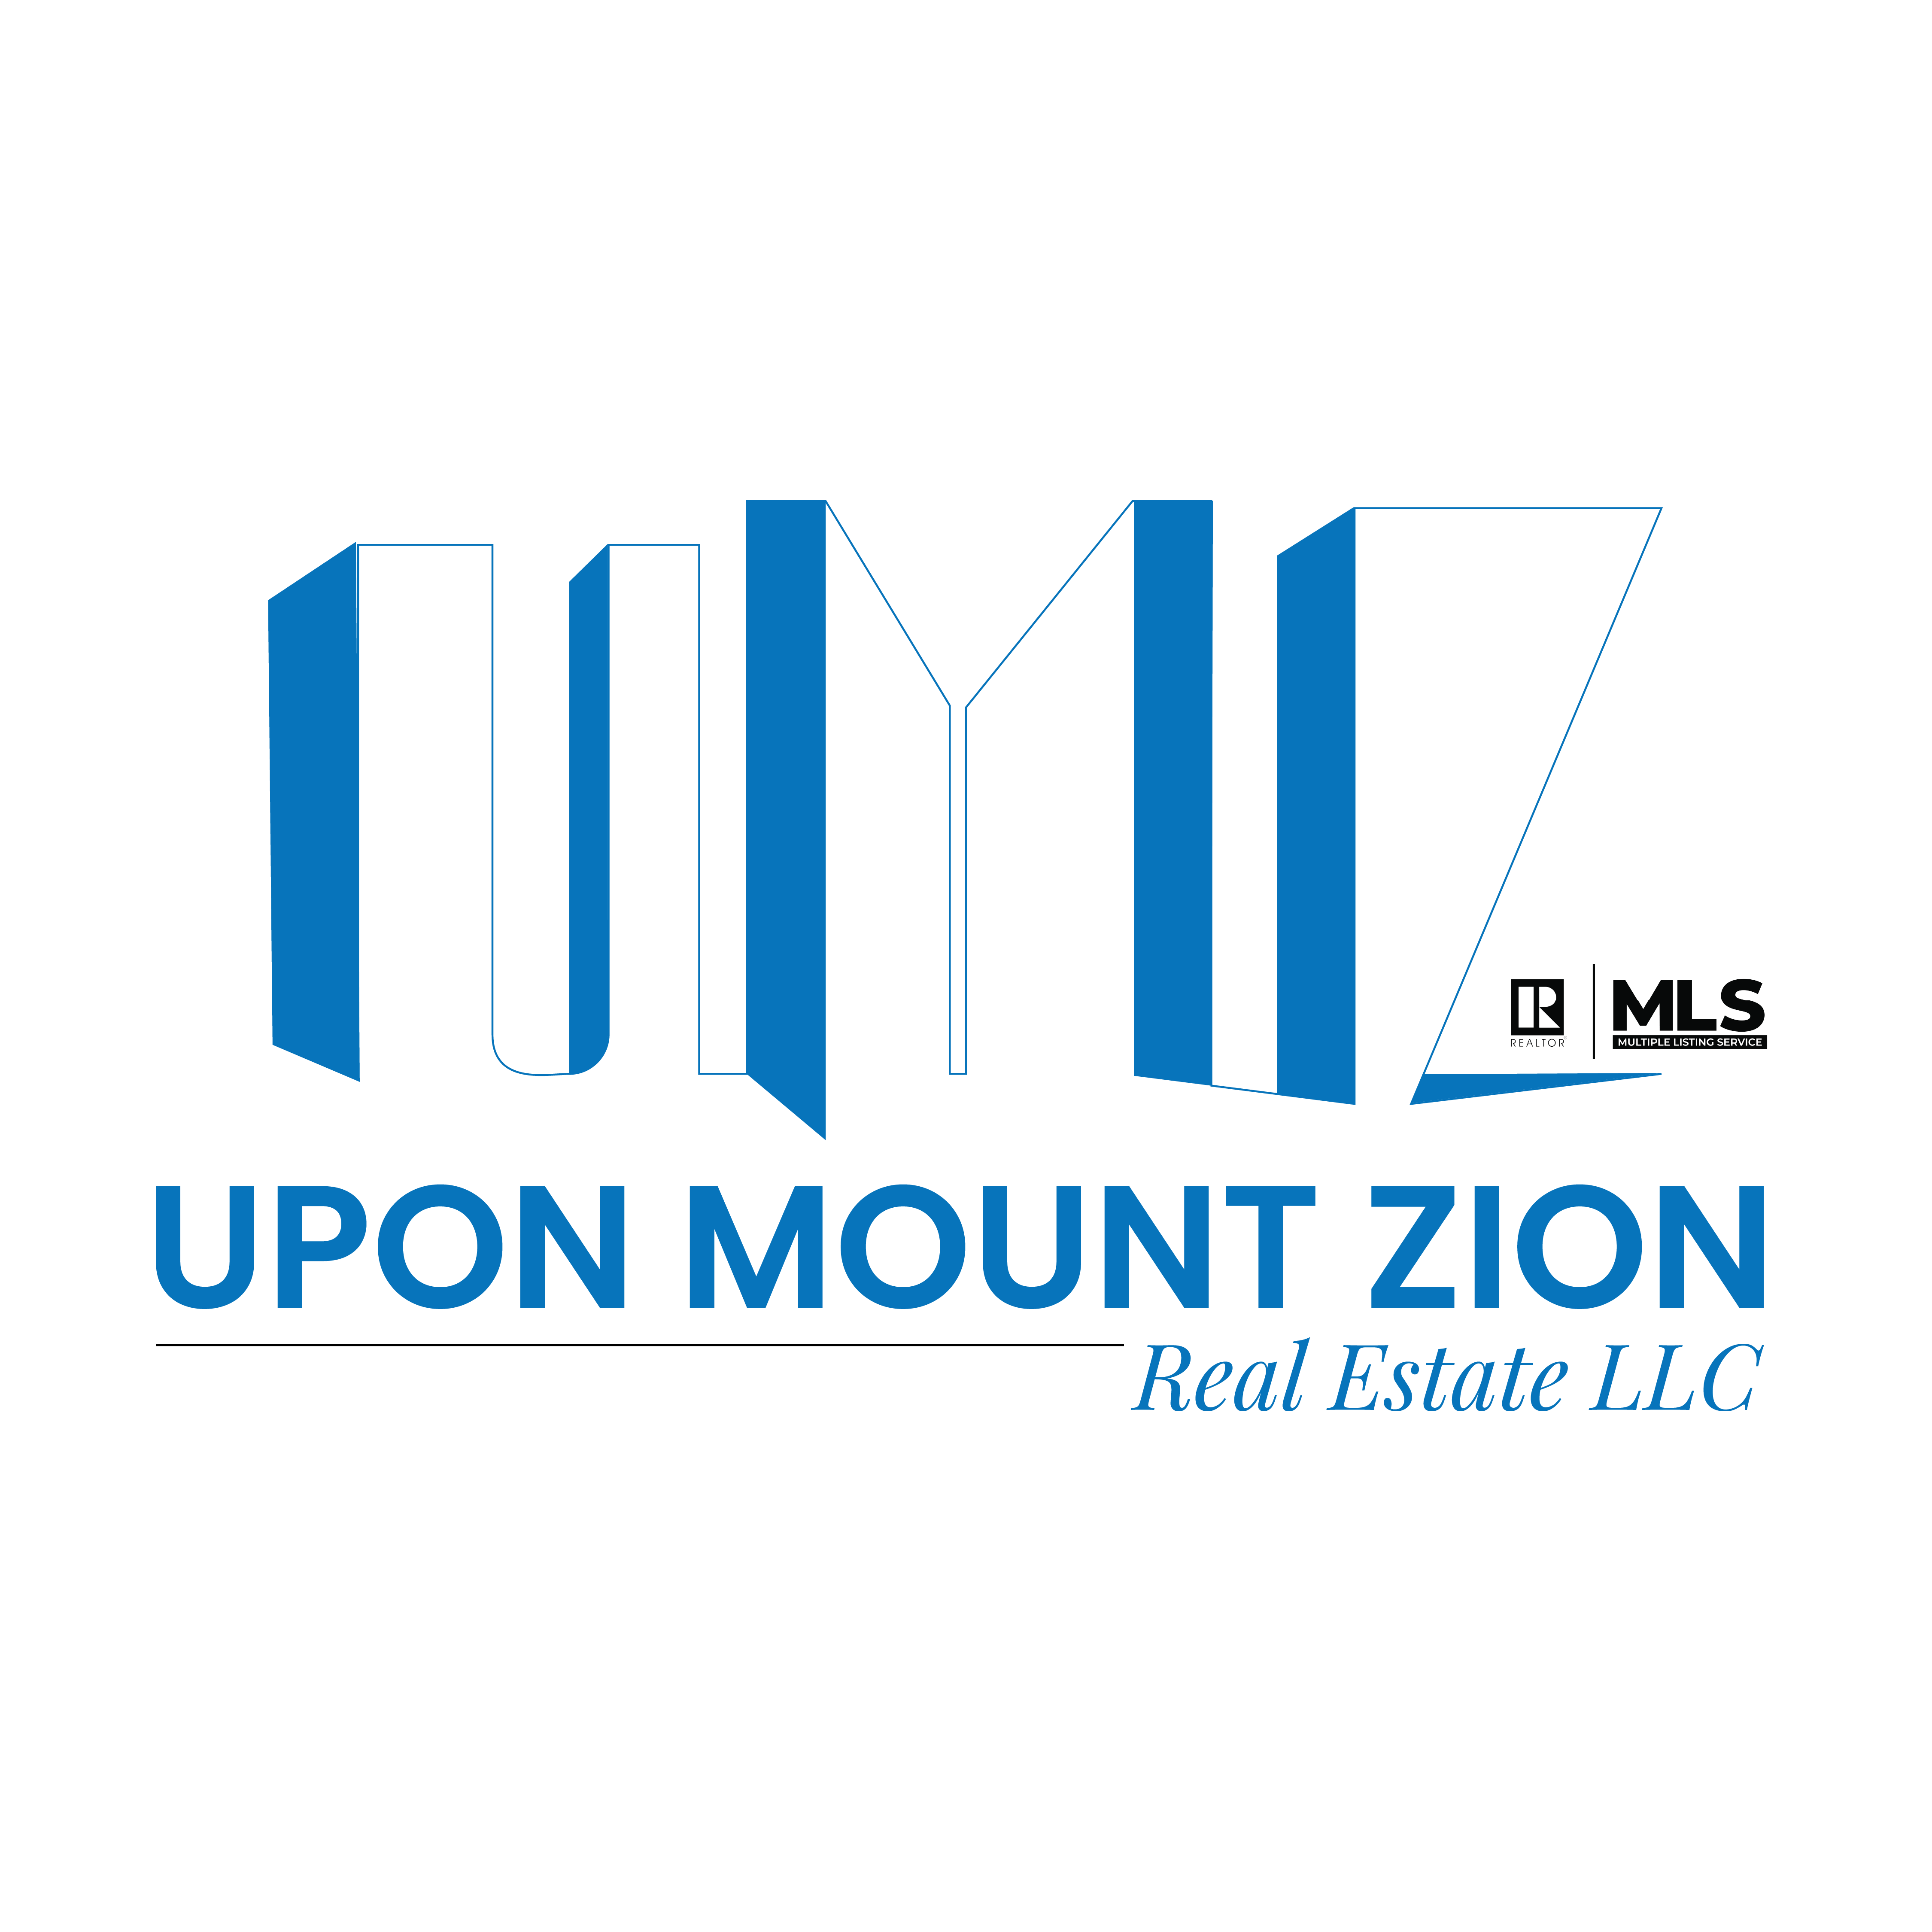 Upon Mount Zion